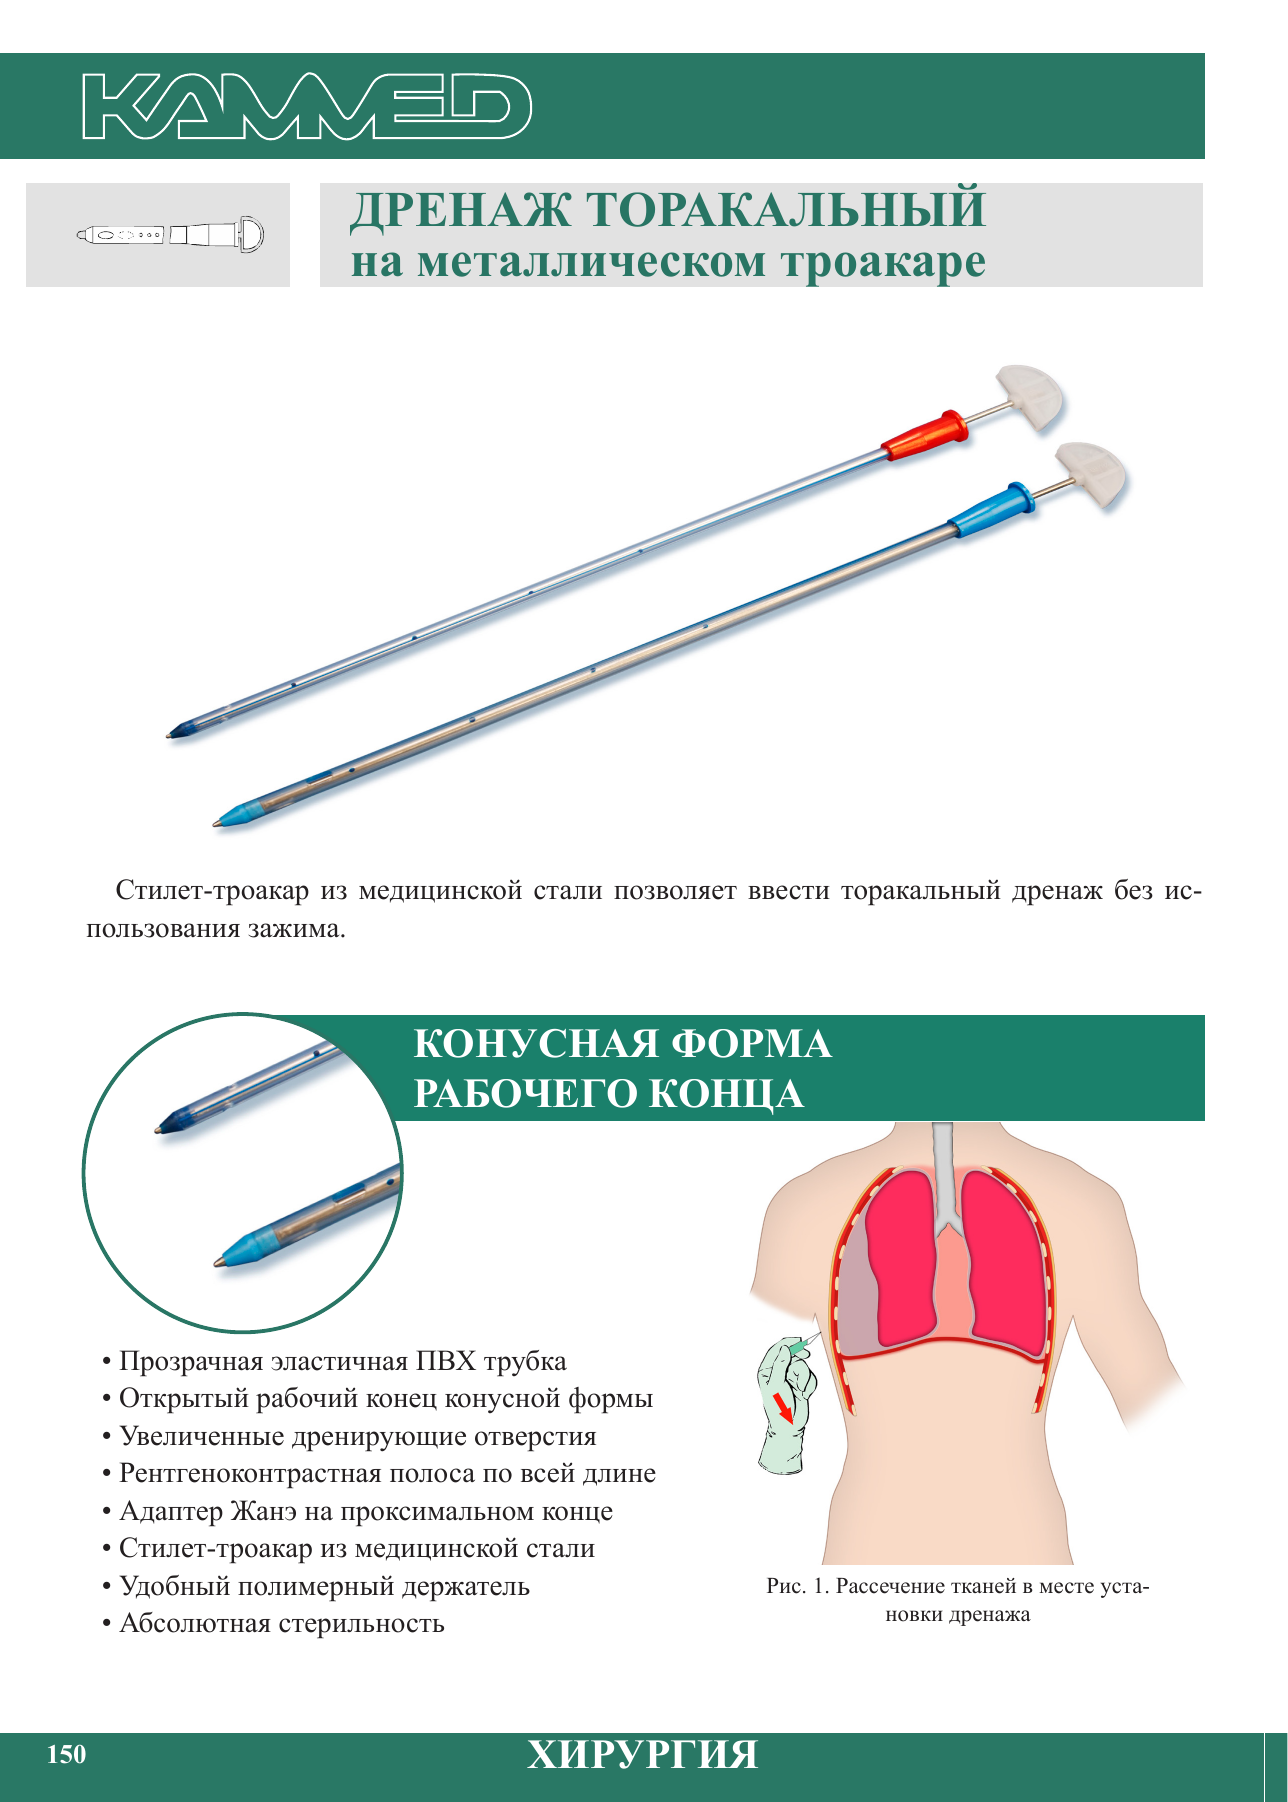 Drainage thoracic metal stylet d.8.0 (pleural) Kammed